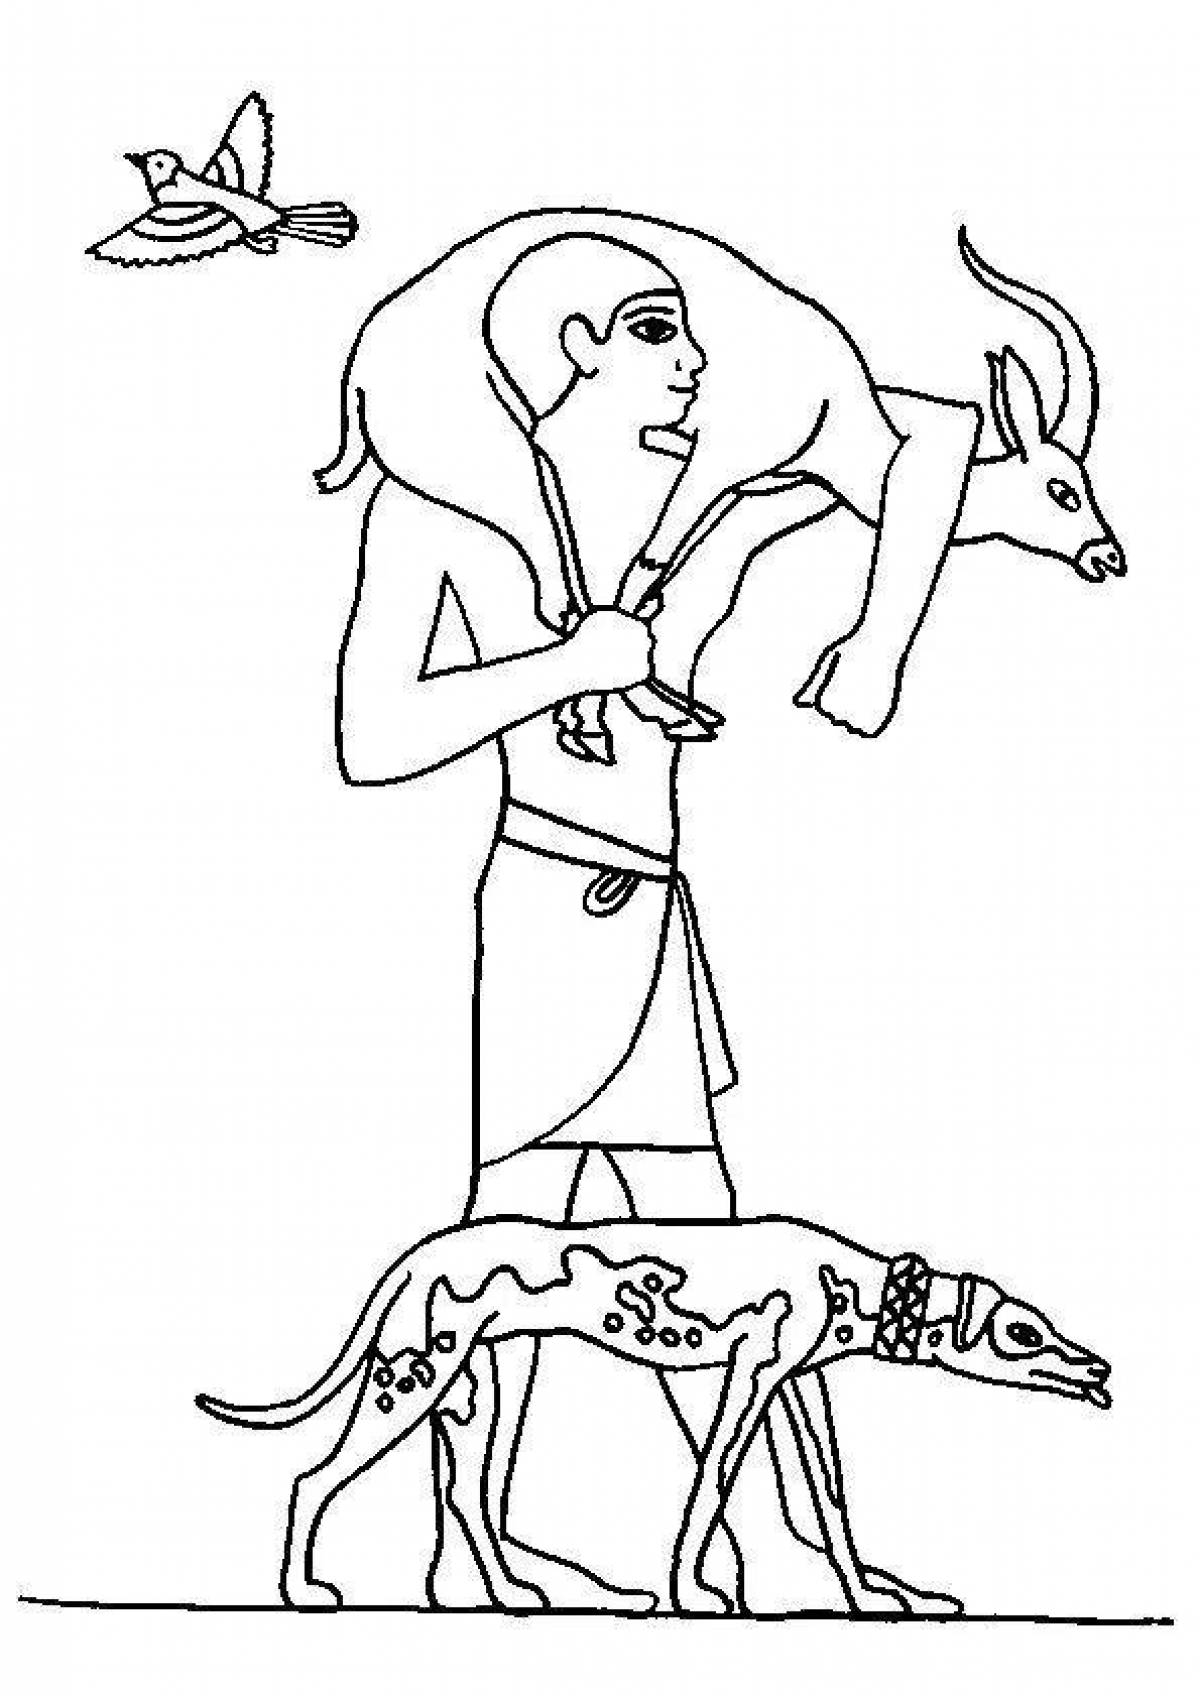 Glorious ancient egypt coloring book